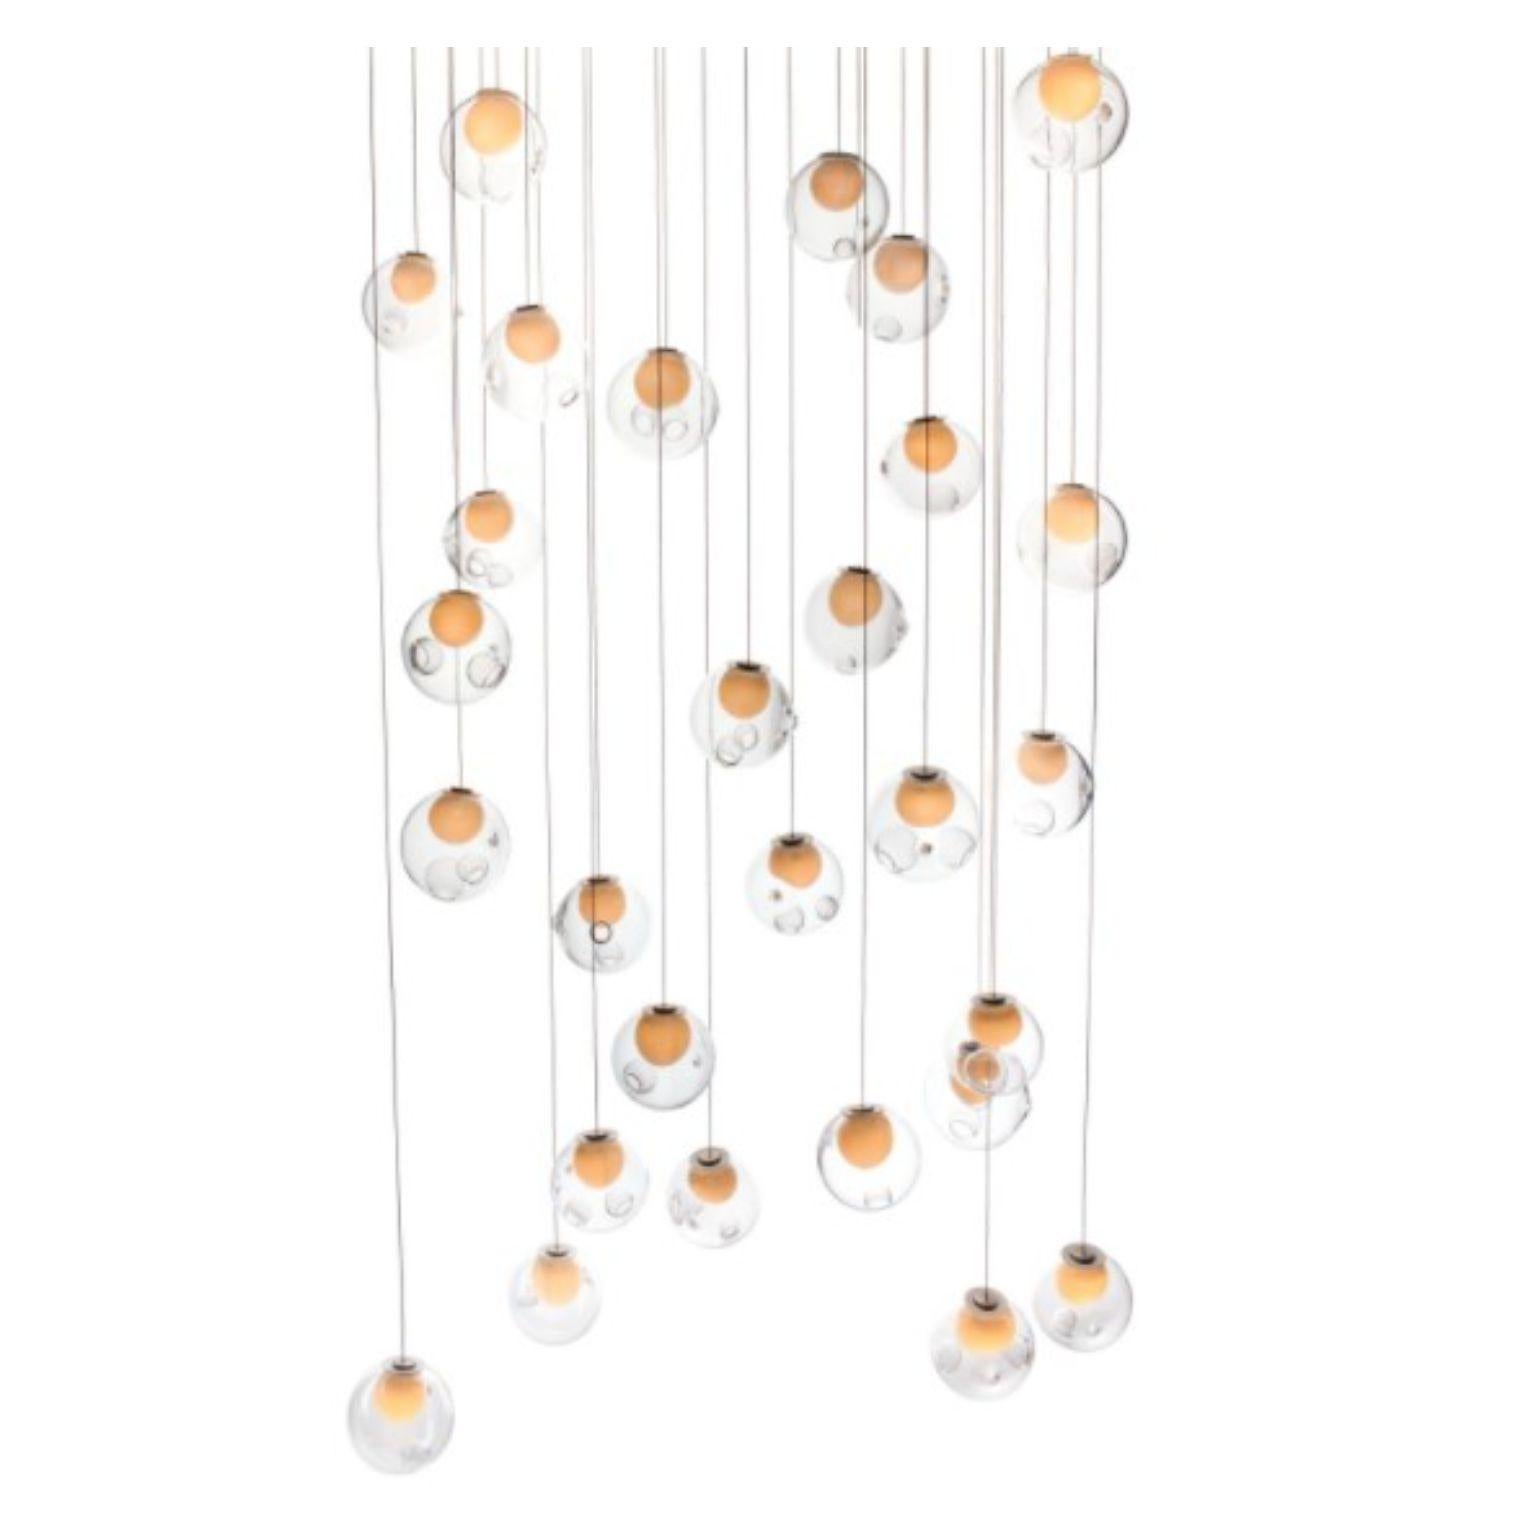 28.28 pendant by Bocci
Dimensions: D 75.5 x H 300 cm
Materials: Diameter brushed nickel canopy
Weight: 65 kg
Also available in different dimensions.
All our lamps can be wired according to each country. If sold to the USA it will be wired for